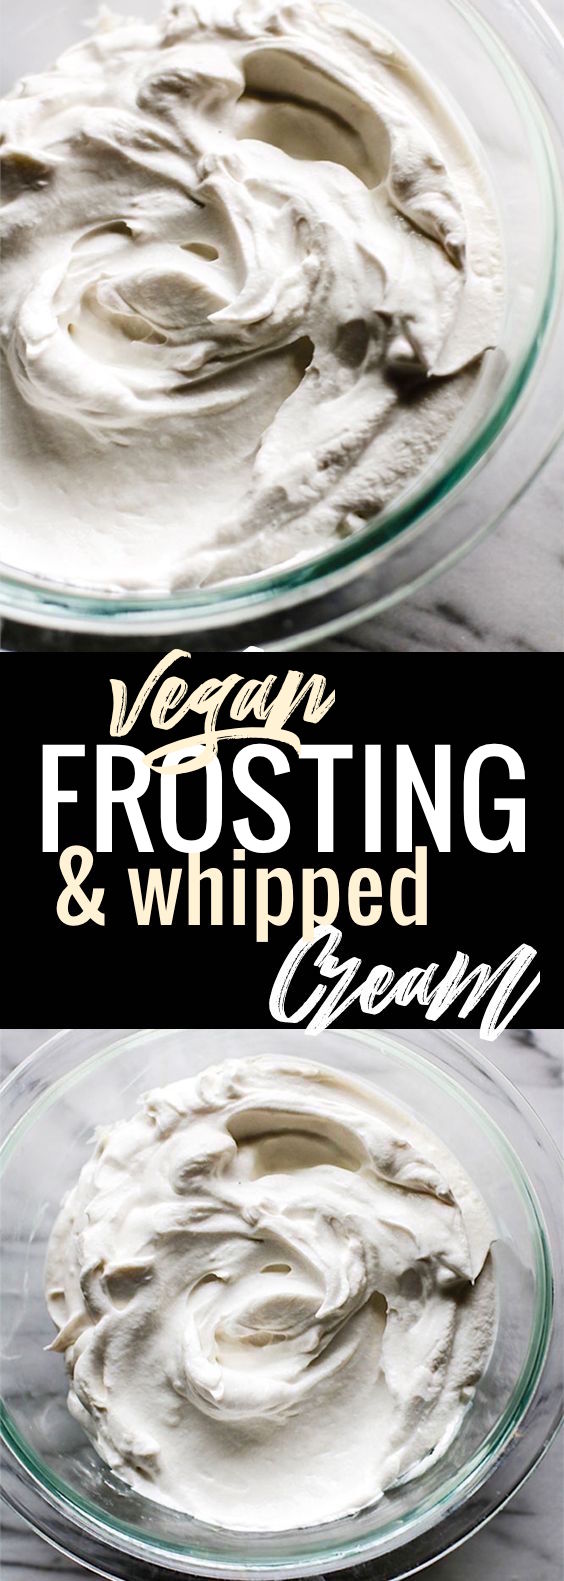 Coconut Cream Vegan Frosting Paleo Option Cotter Crunch,What Is Aioli Sauce Made Of